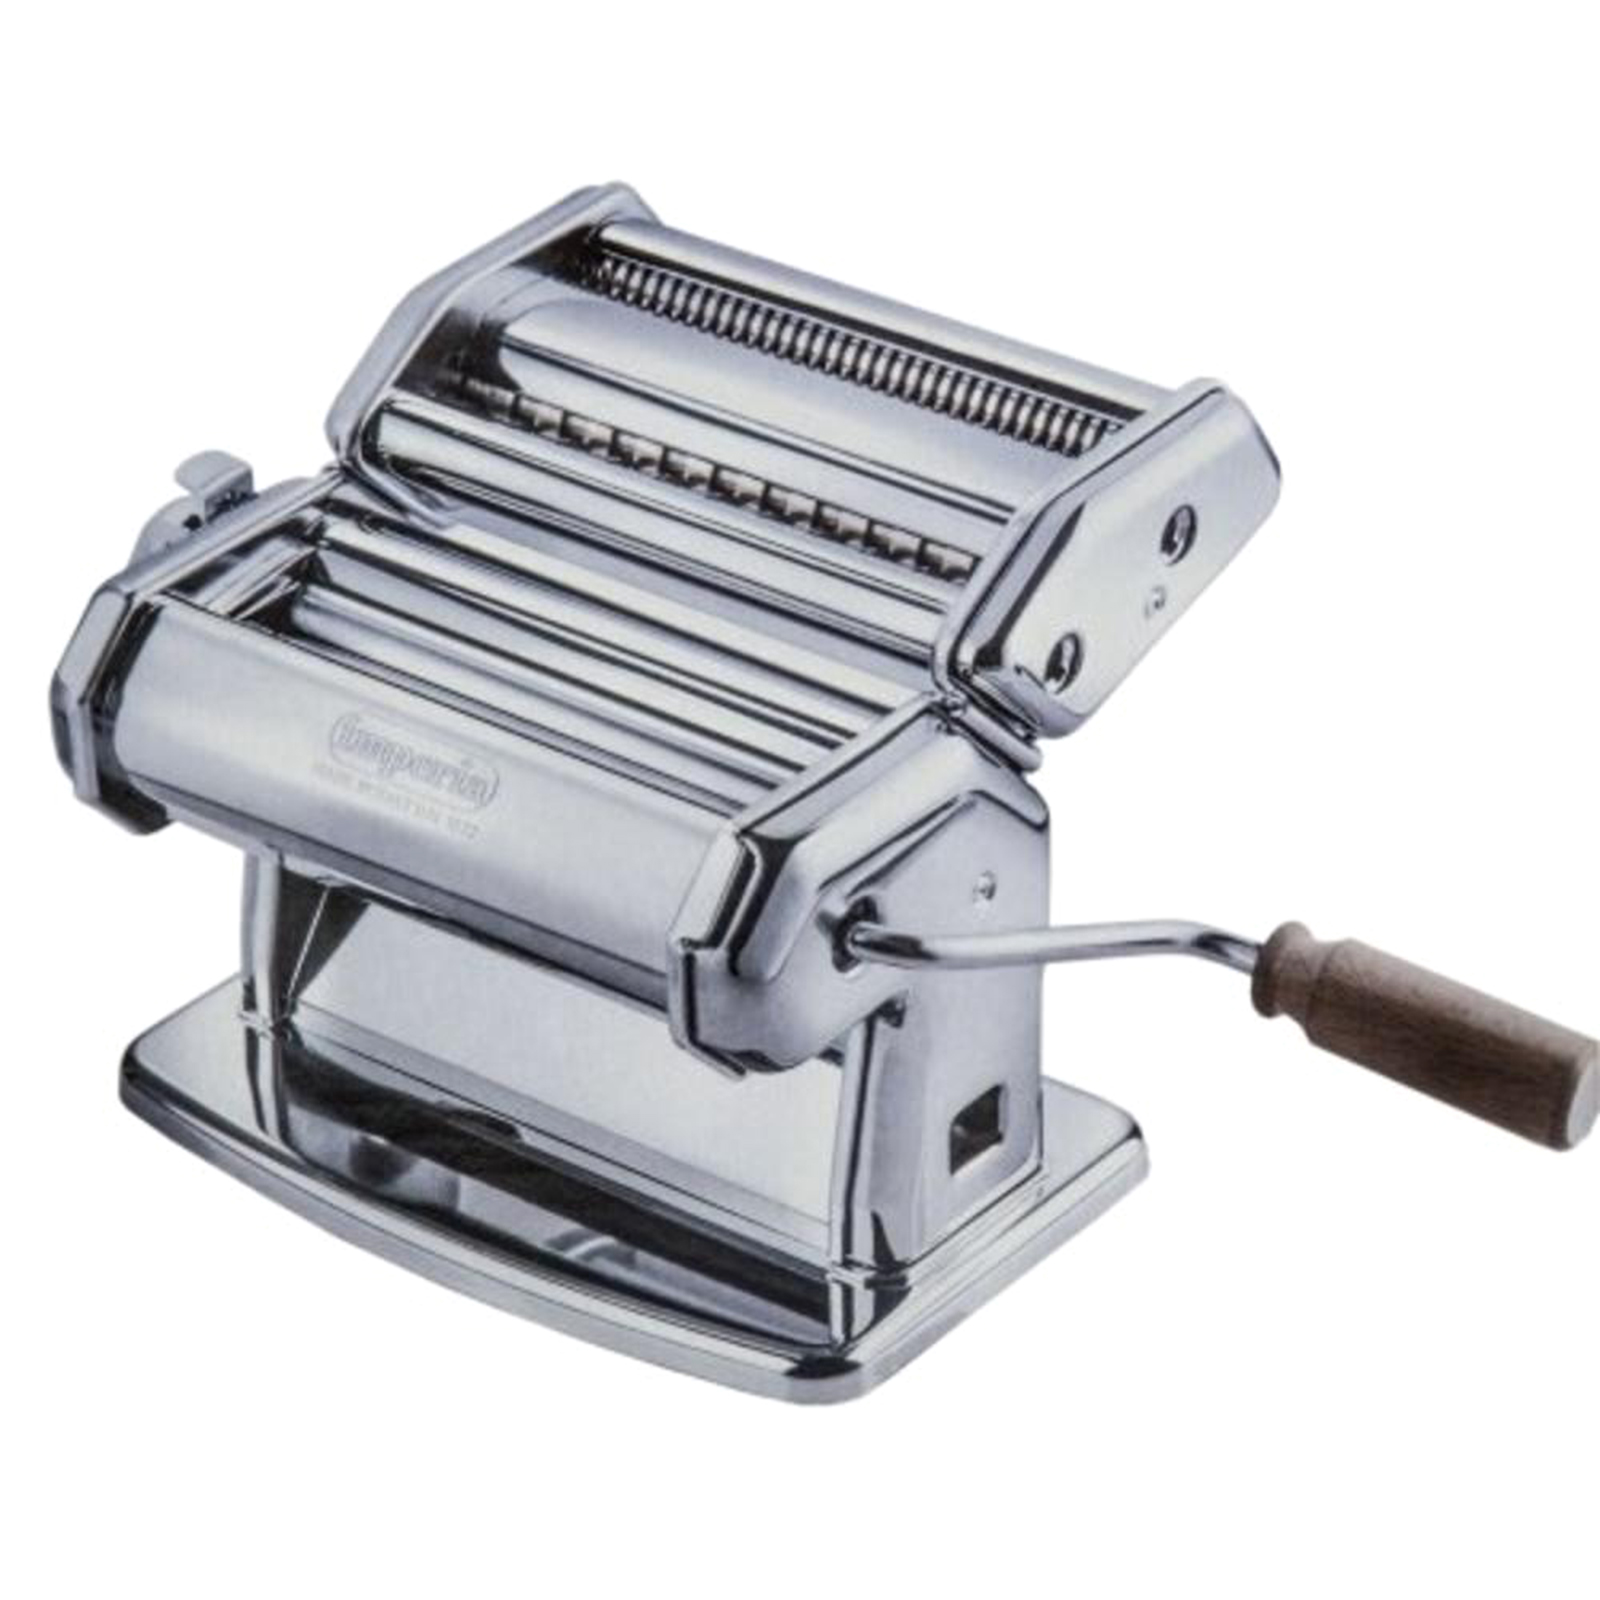 Cucina Pro Heavy Duty Pasta Maker Machine with Easy Lock Dial